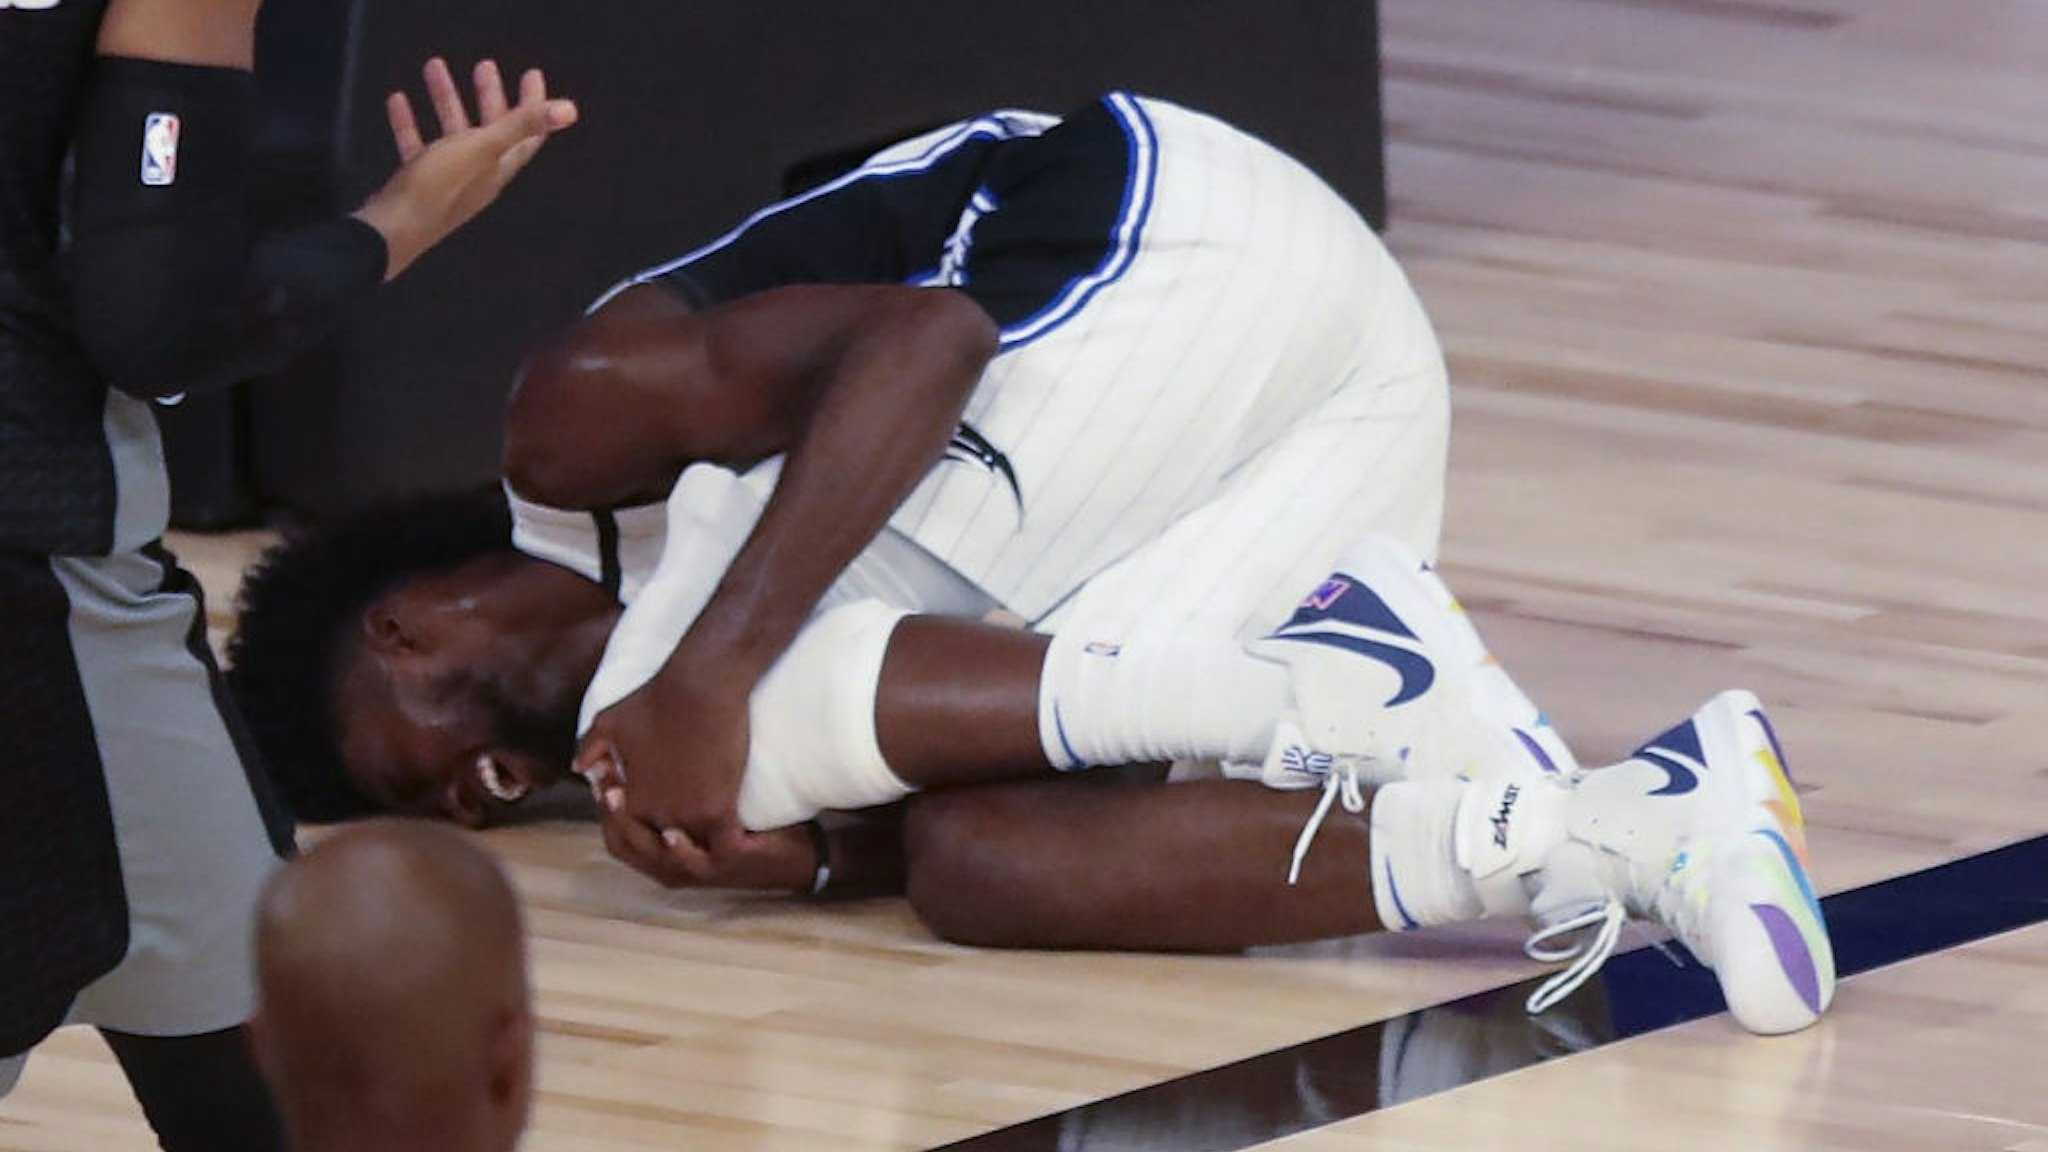 Orlando Magic forward Jonathan Isaac lays on the court holding his left knee after falling during a play in the fourth quarter against the Sacramento Kings on Sunday, Aug. 2, 2020 at Disney's Wide World of Sports' HP Field House in Lake Buena Vista, Florida.